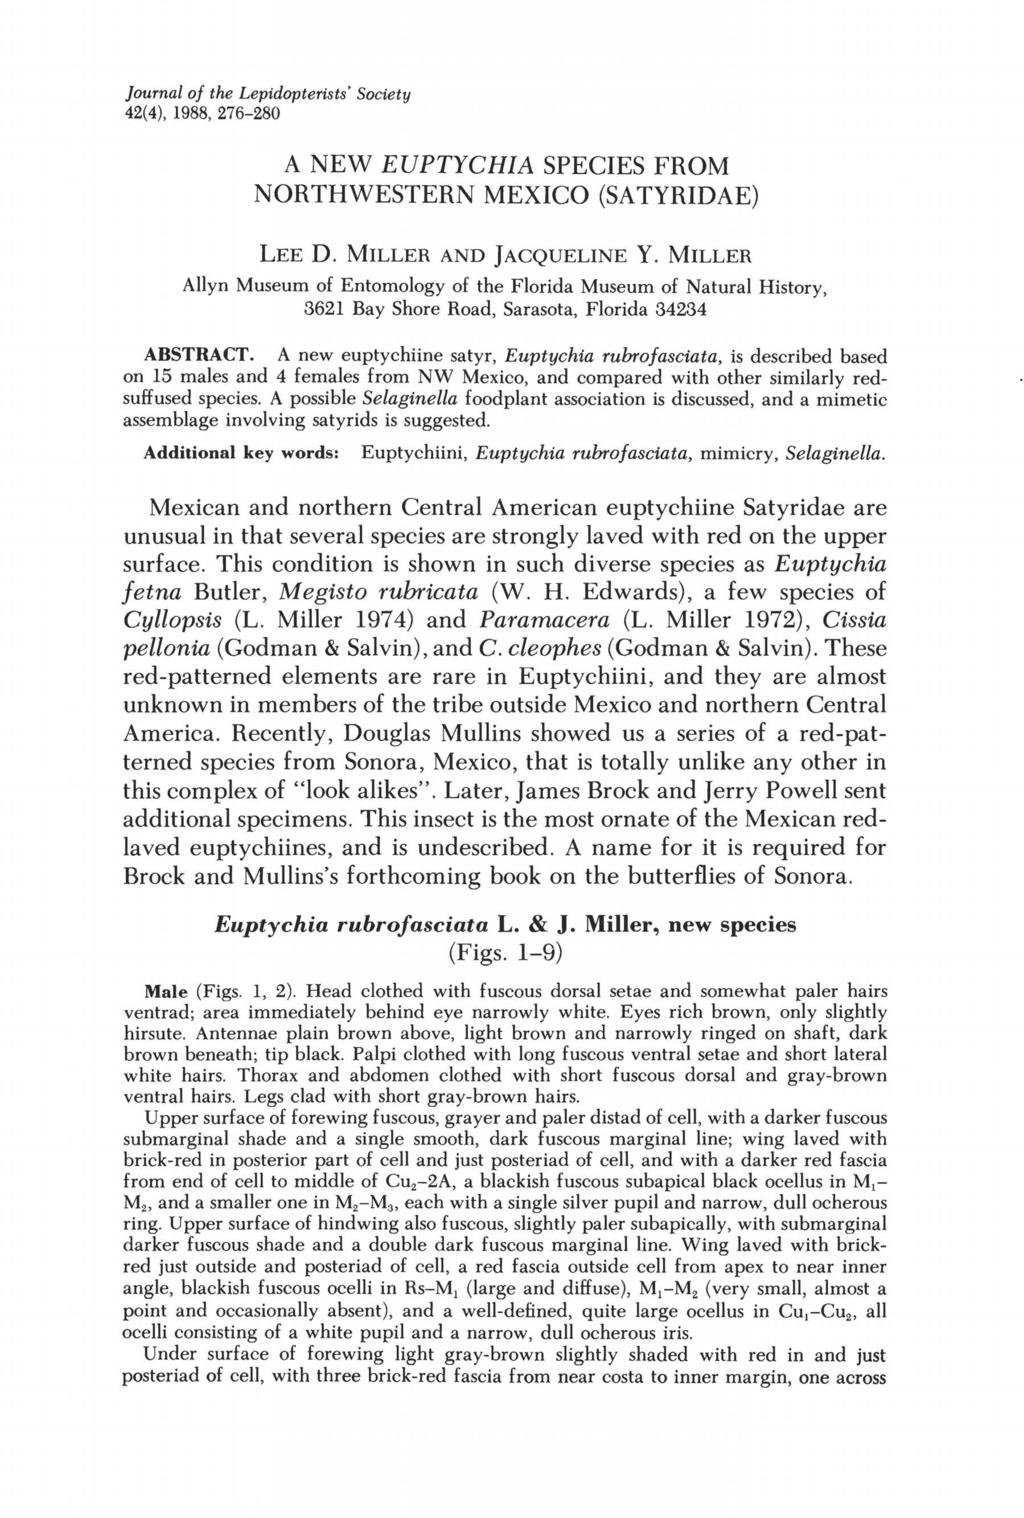 Journal of the Lepidopterists' Society 42(4), 1988, 276-280 A NEW EUPTYCHIA SPECIES FROM NORTHWESTERN MEXICO (SA TYRIDAE) LEE D. MILLER AND JACQUELINE Y.